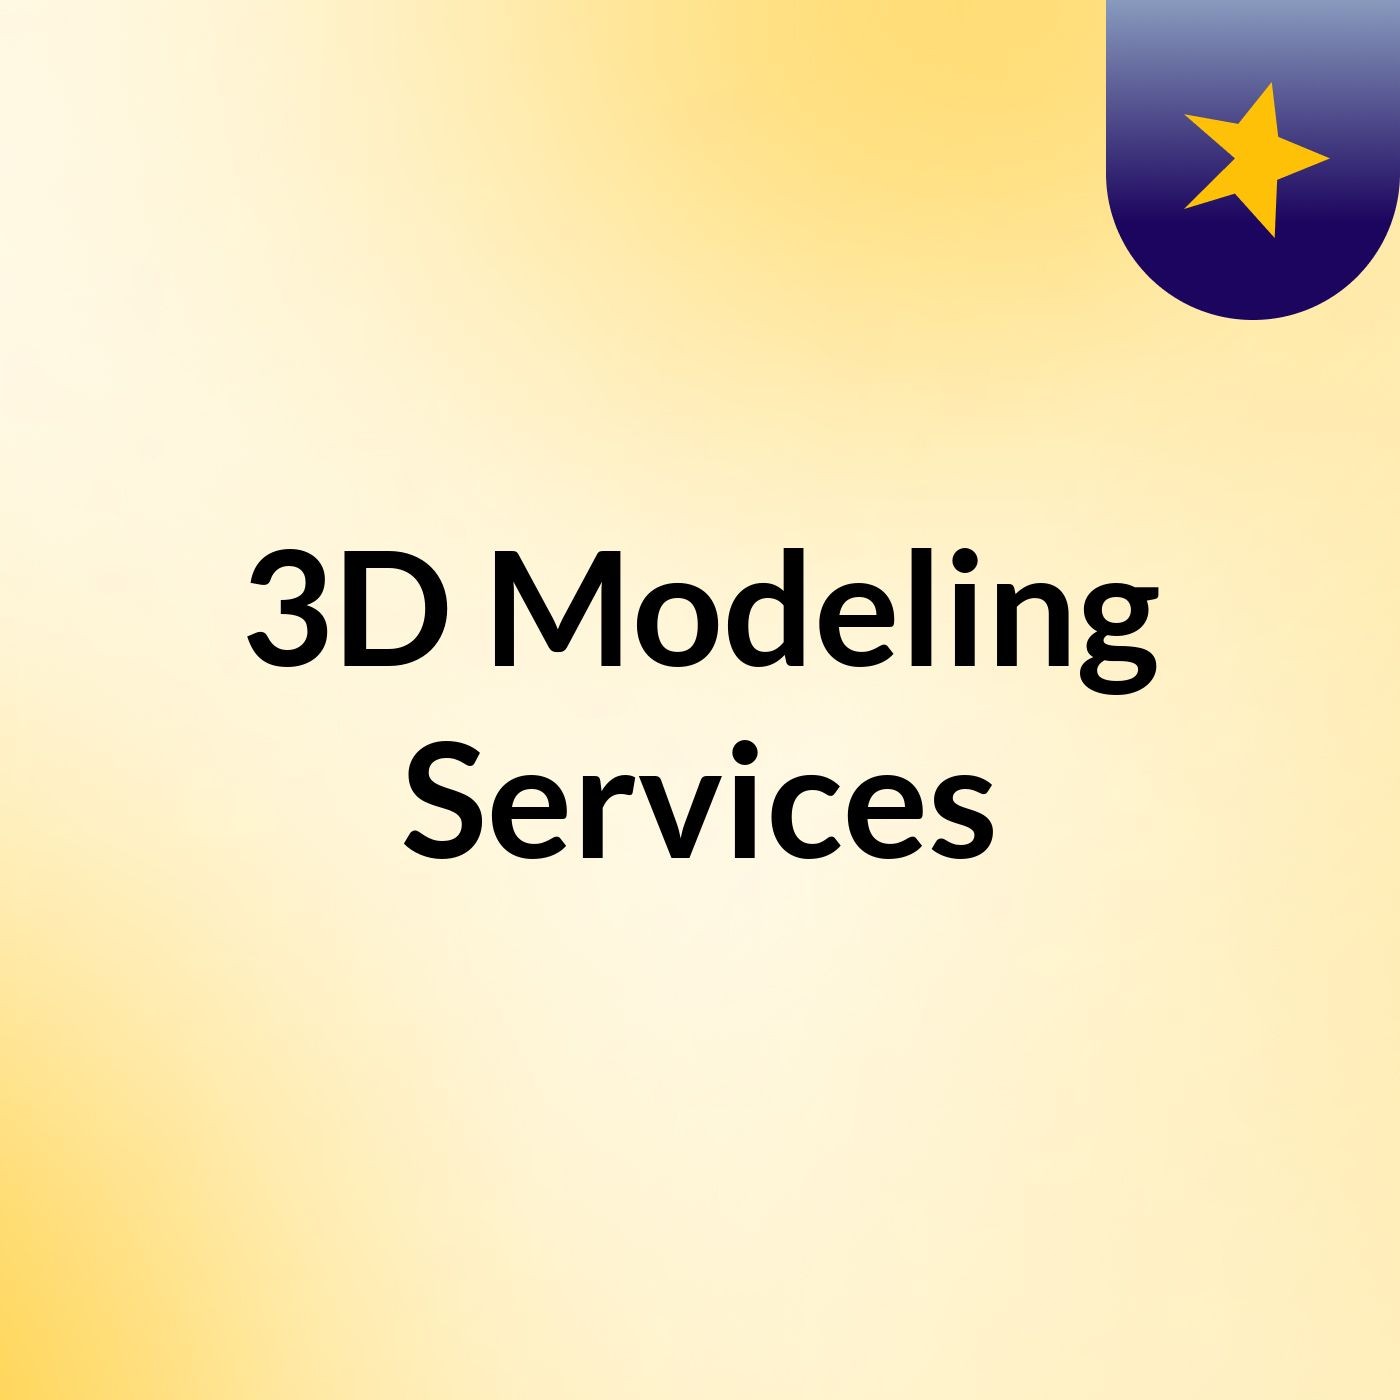 3D Product Modeling Services